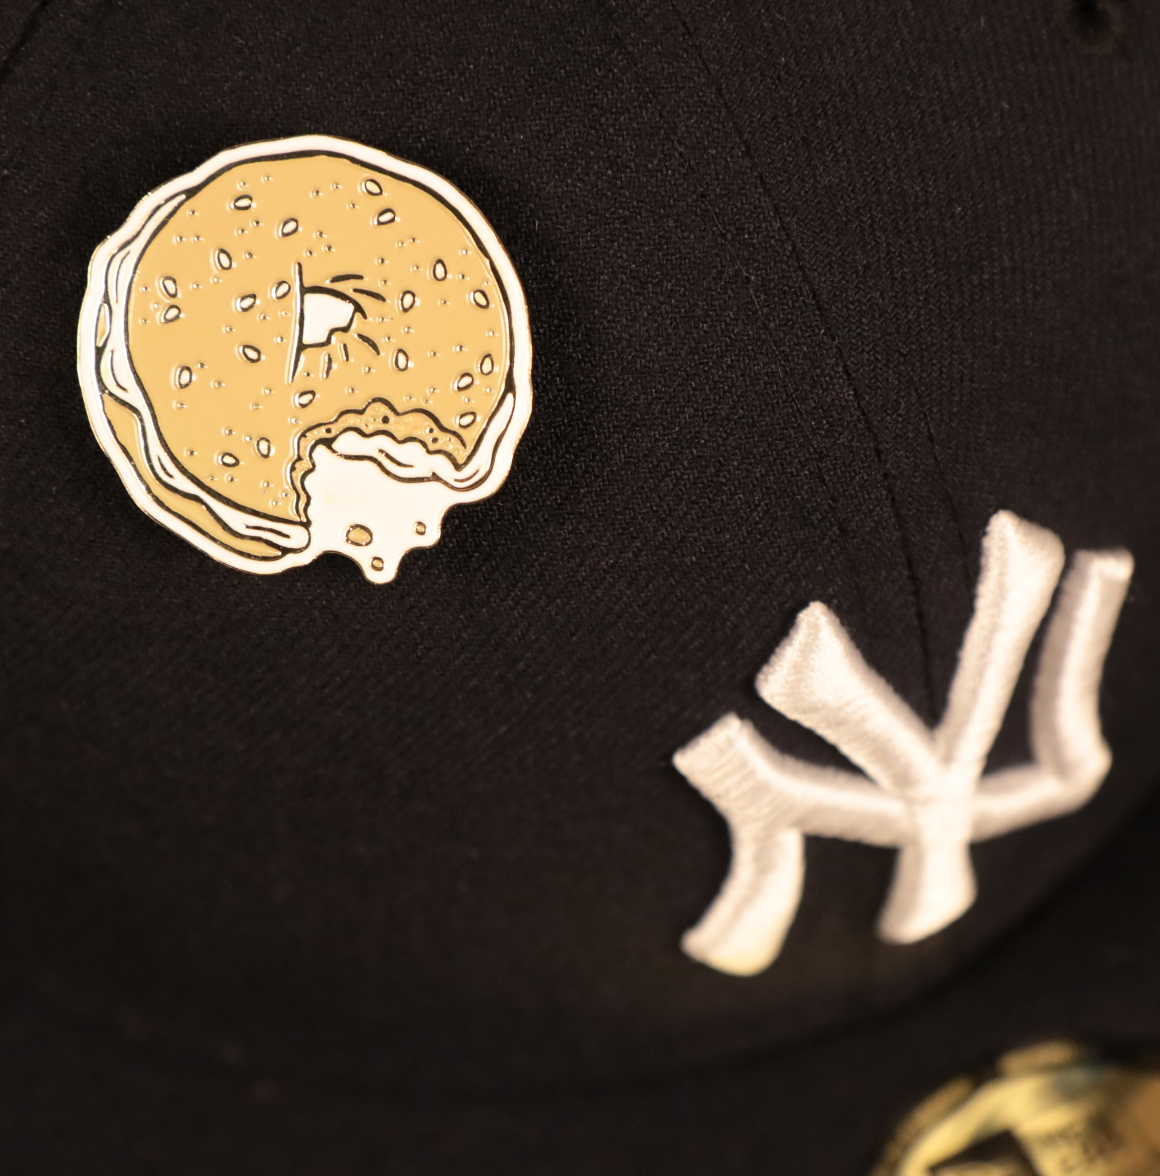 The New York Bagel Fitted Cap Pin | Enamel Pin For Hat through the air holes